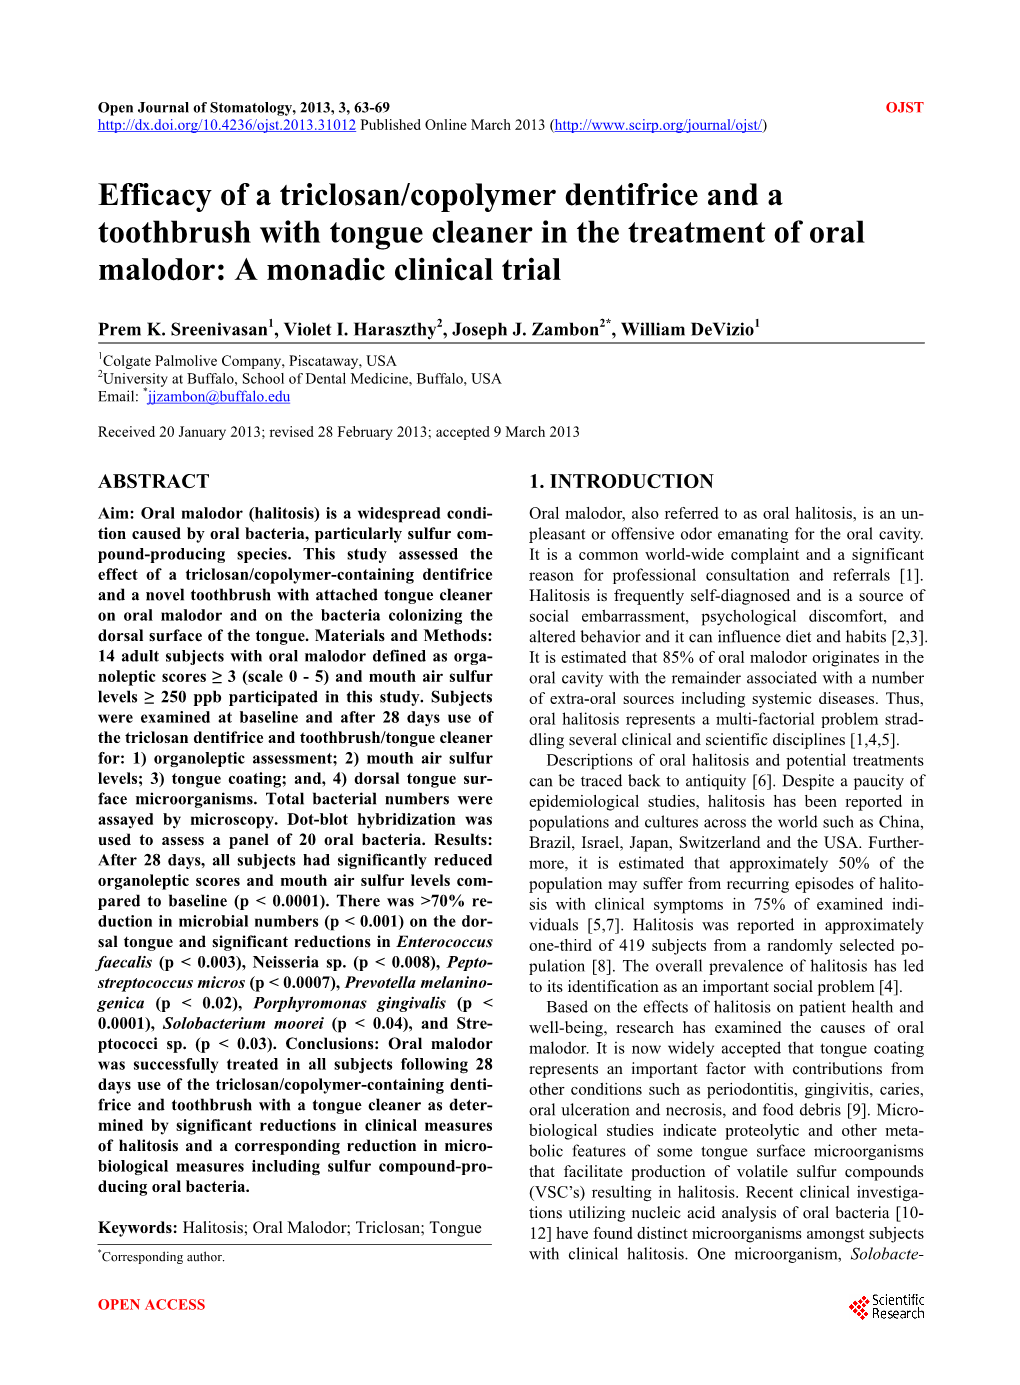 Efficacy of a Triclosan/Copolymer Dentifrice and a Toothbrush with Tongue Cleaner in the Treatment of Oral Malodor: a Monadic Clinical Trial